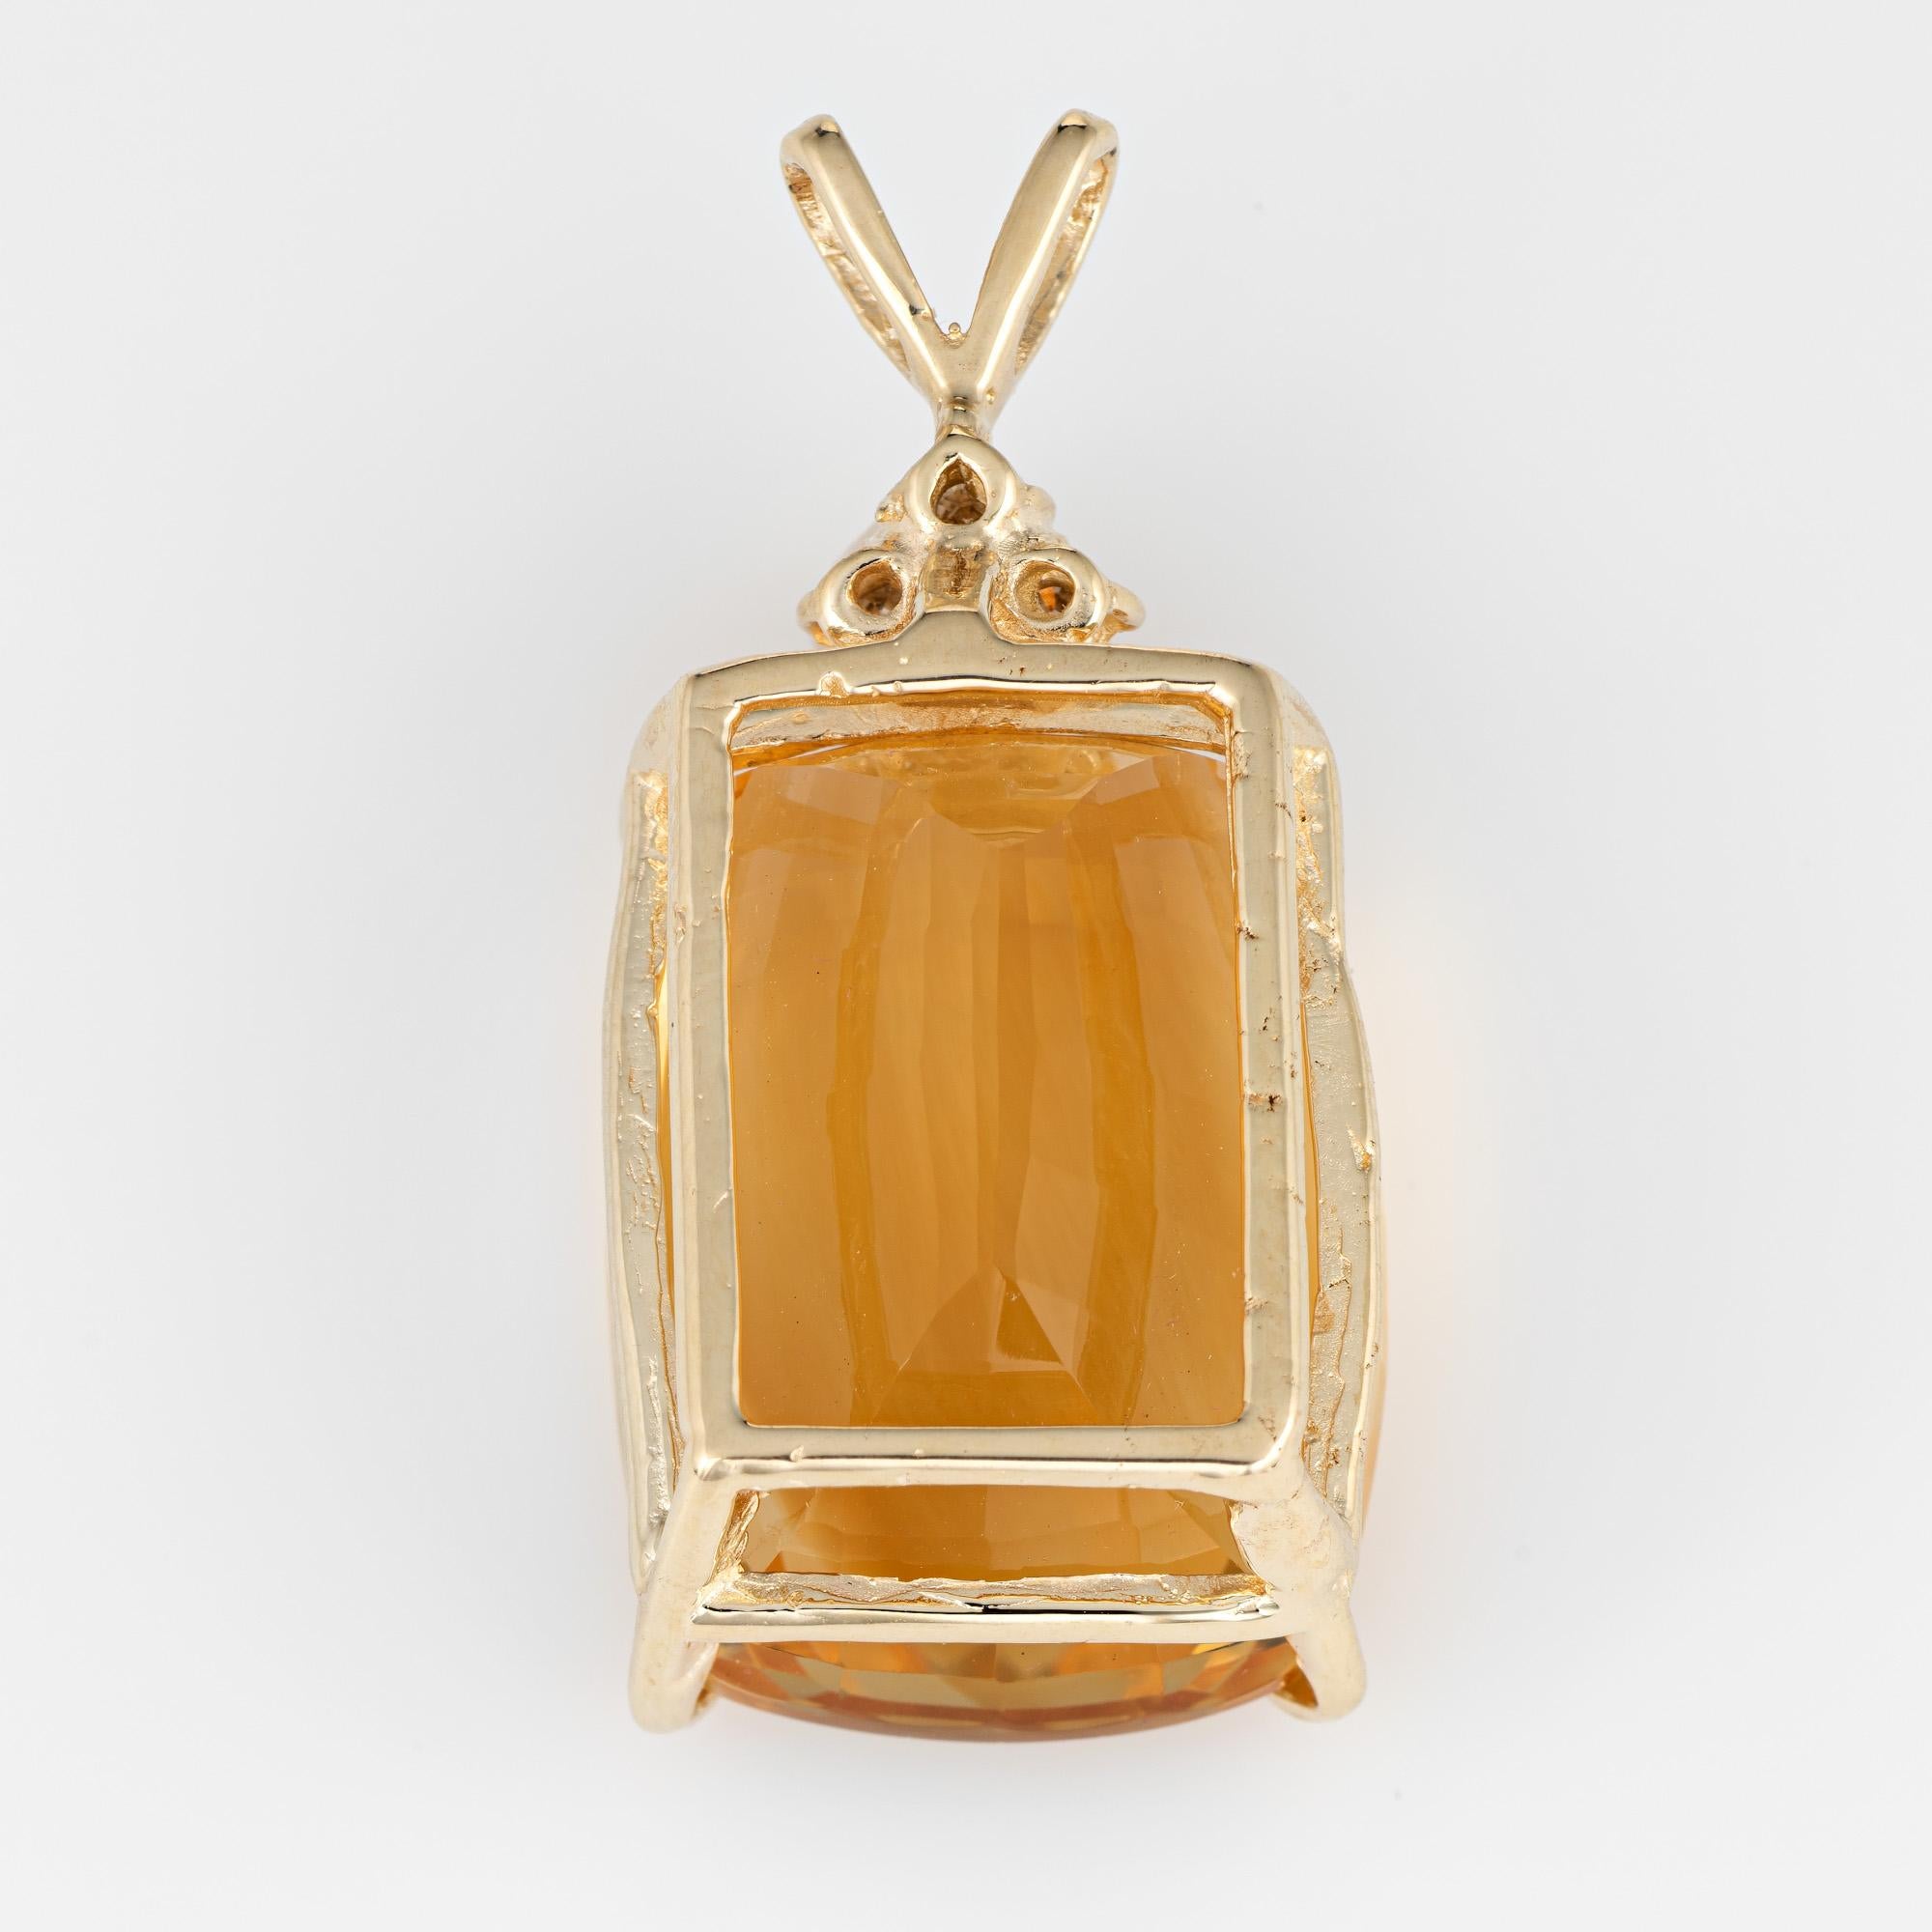 Finely detailed large vintage citrine & diamond pendant (circa 1960s to 1970s) crafted in 14k yellow gold.   

The citrine measures 22.5mm x 16.5mm (estimated at 31 carats). The citrine is in excellent condition and free of cracks or chips. The